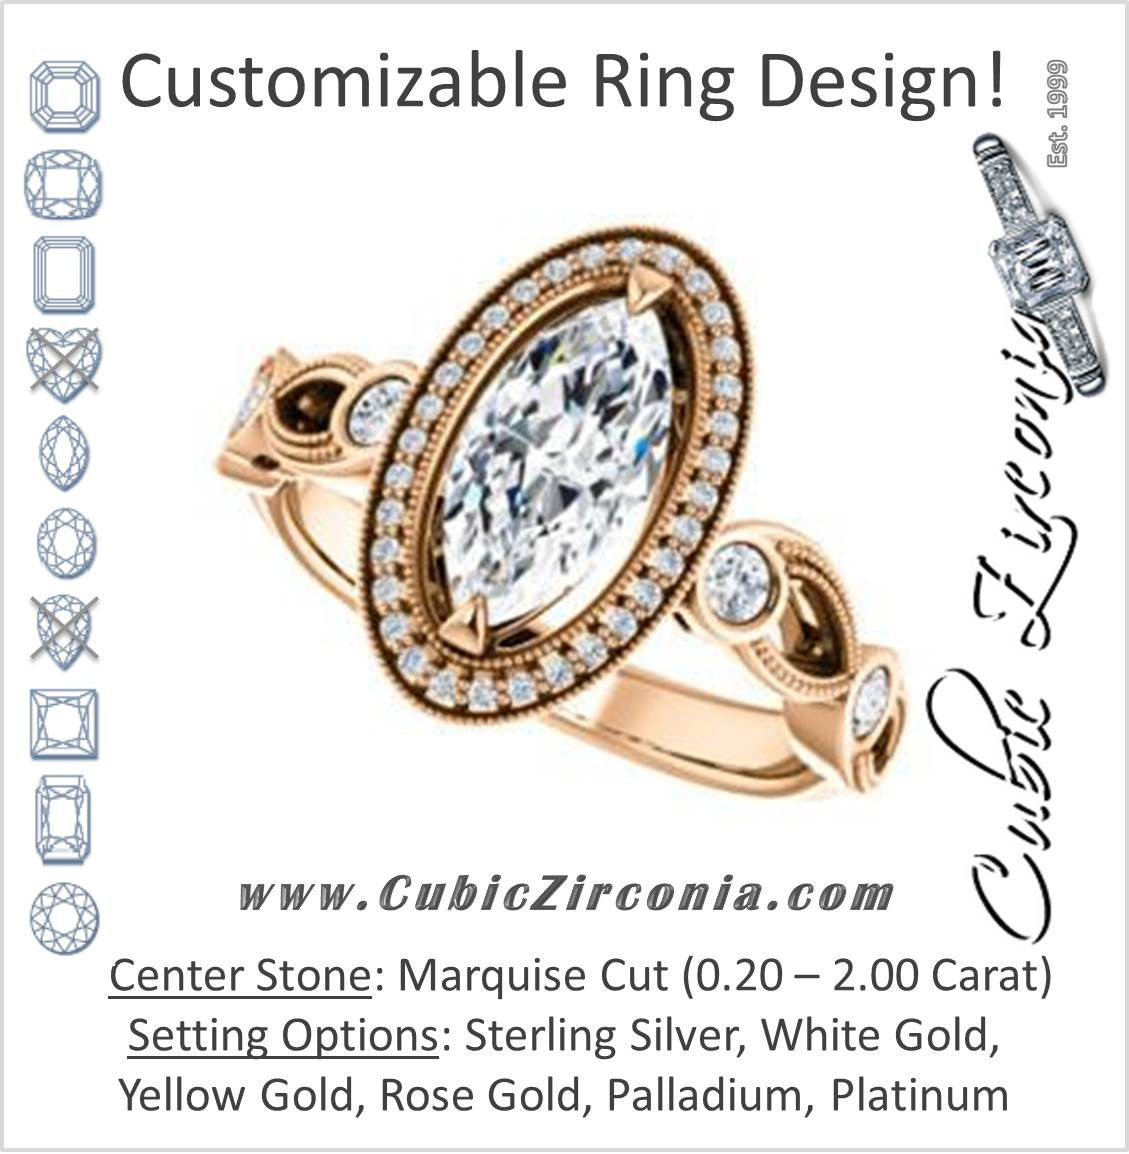 Cubic Zirconia Engagement Ring- The Lois Belle (Customizable Marquise Cut Halo-Style with Twisting Filigreed Infinity Split-Band)